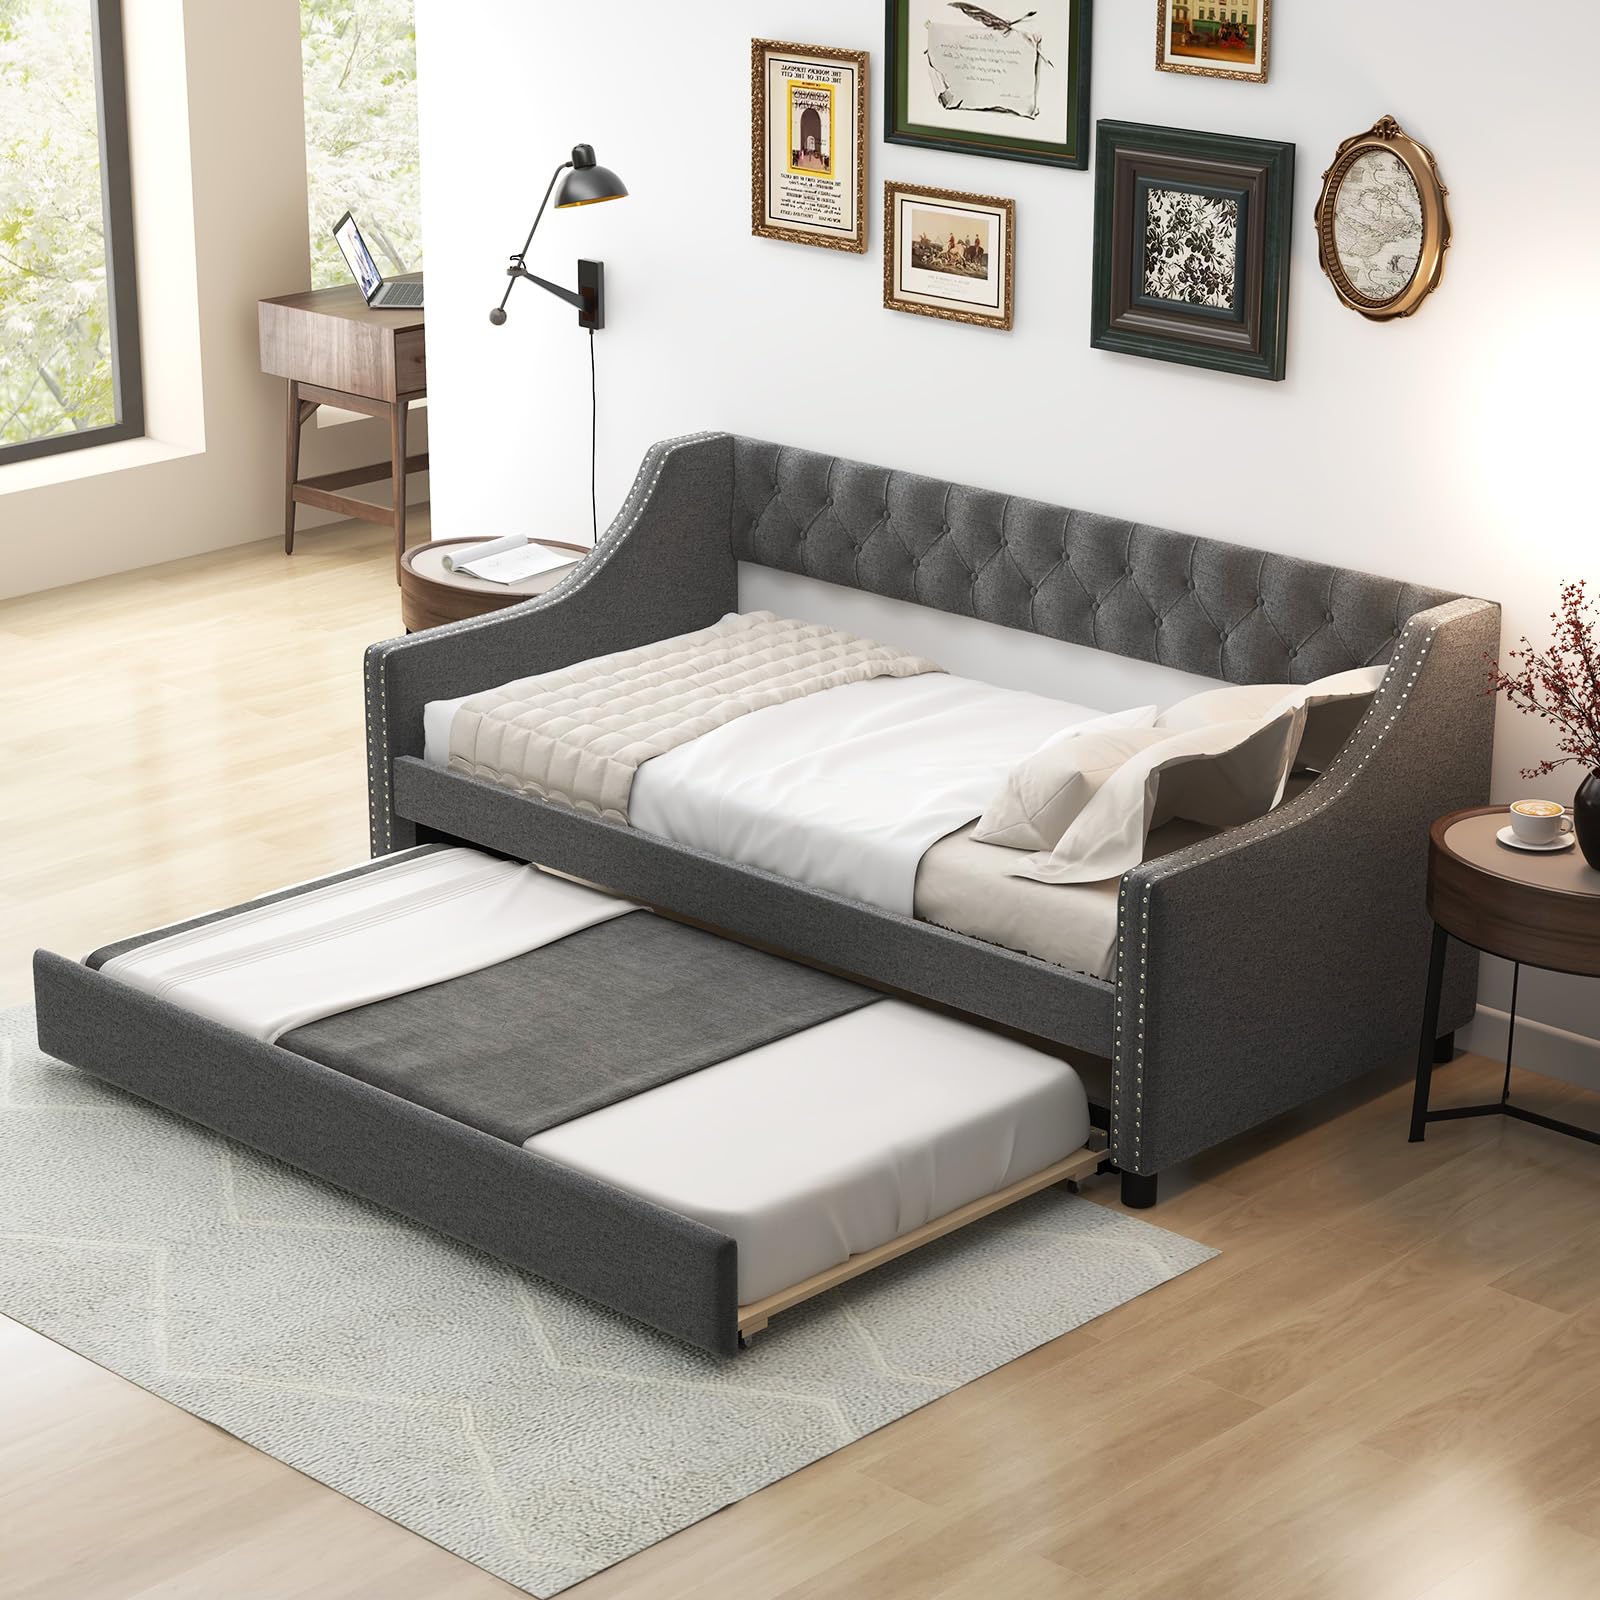 Giantex Upholstered Twin Daybed with Trundle